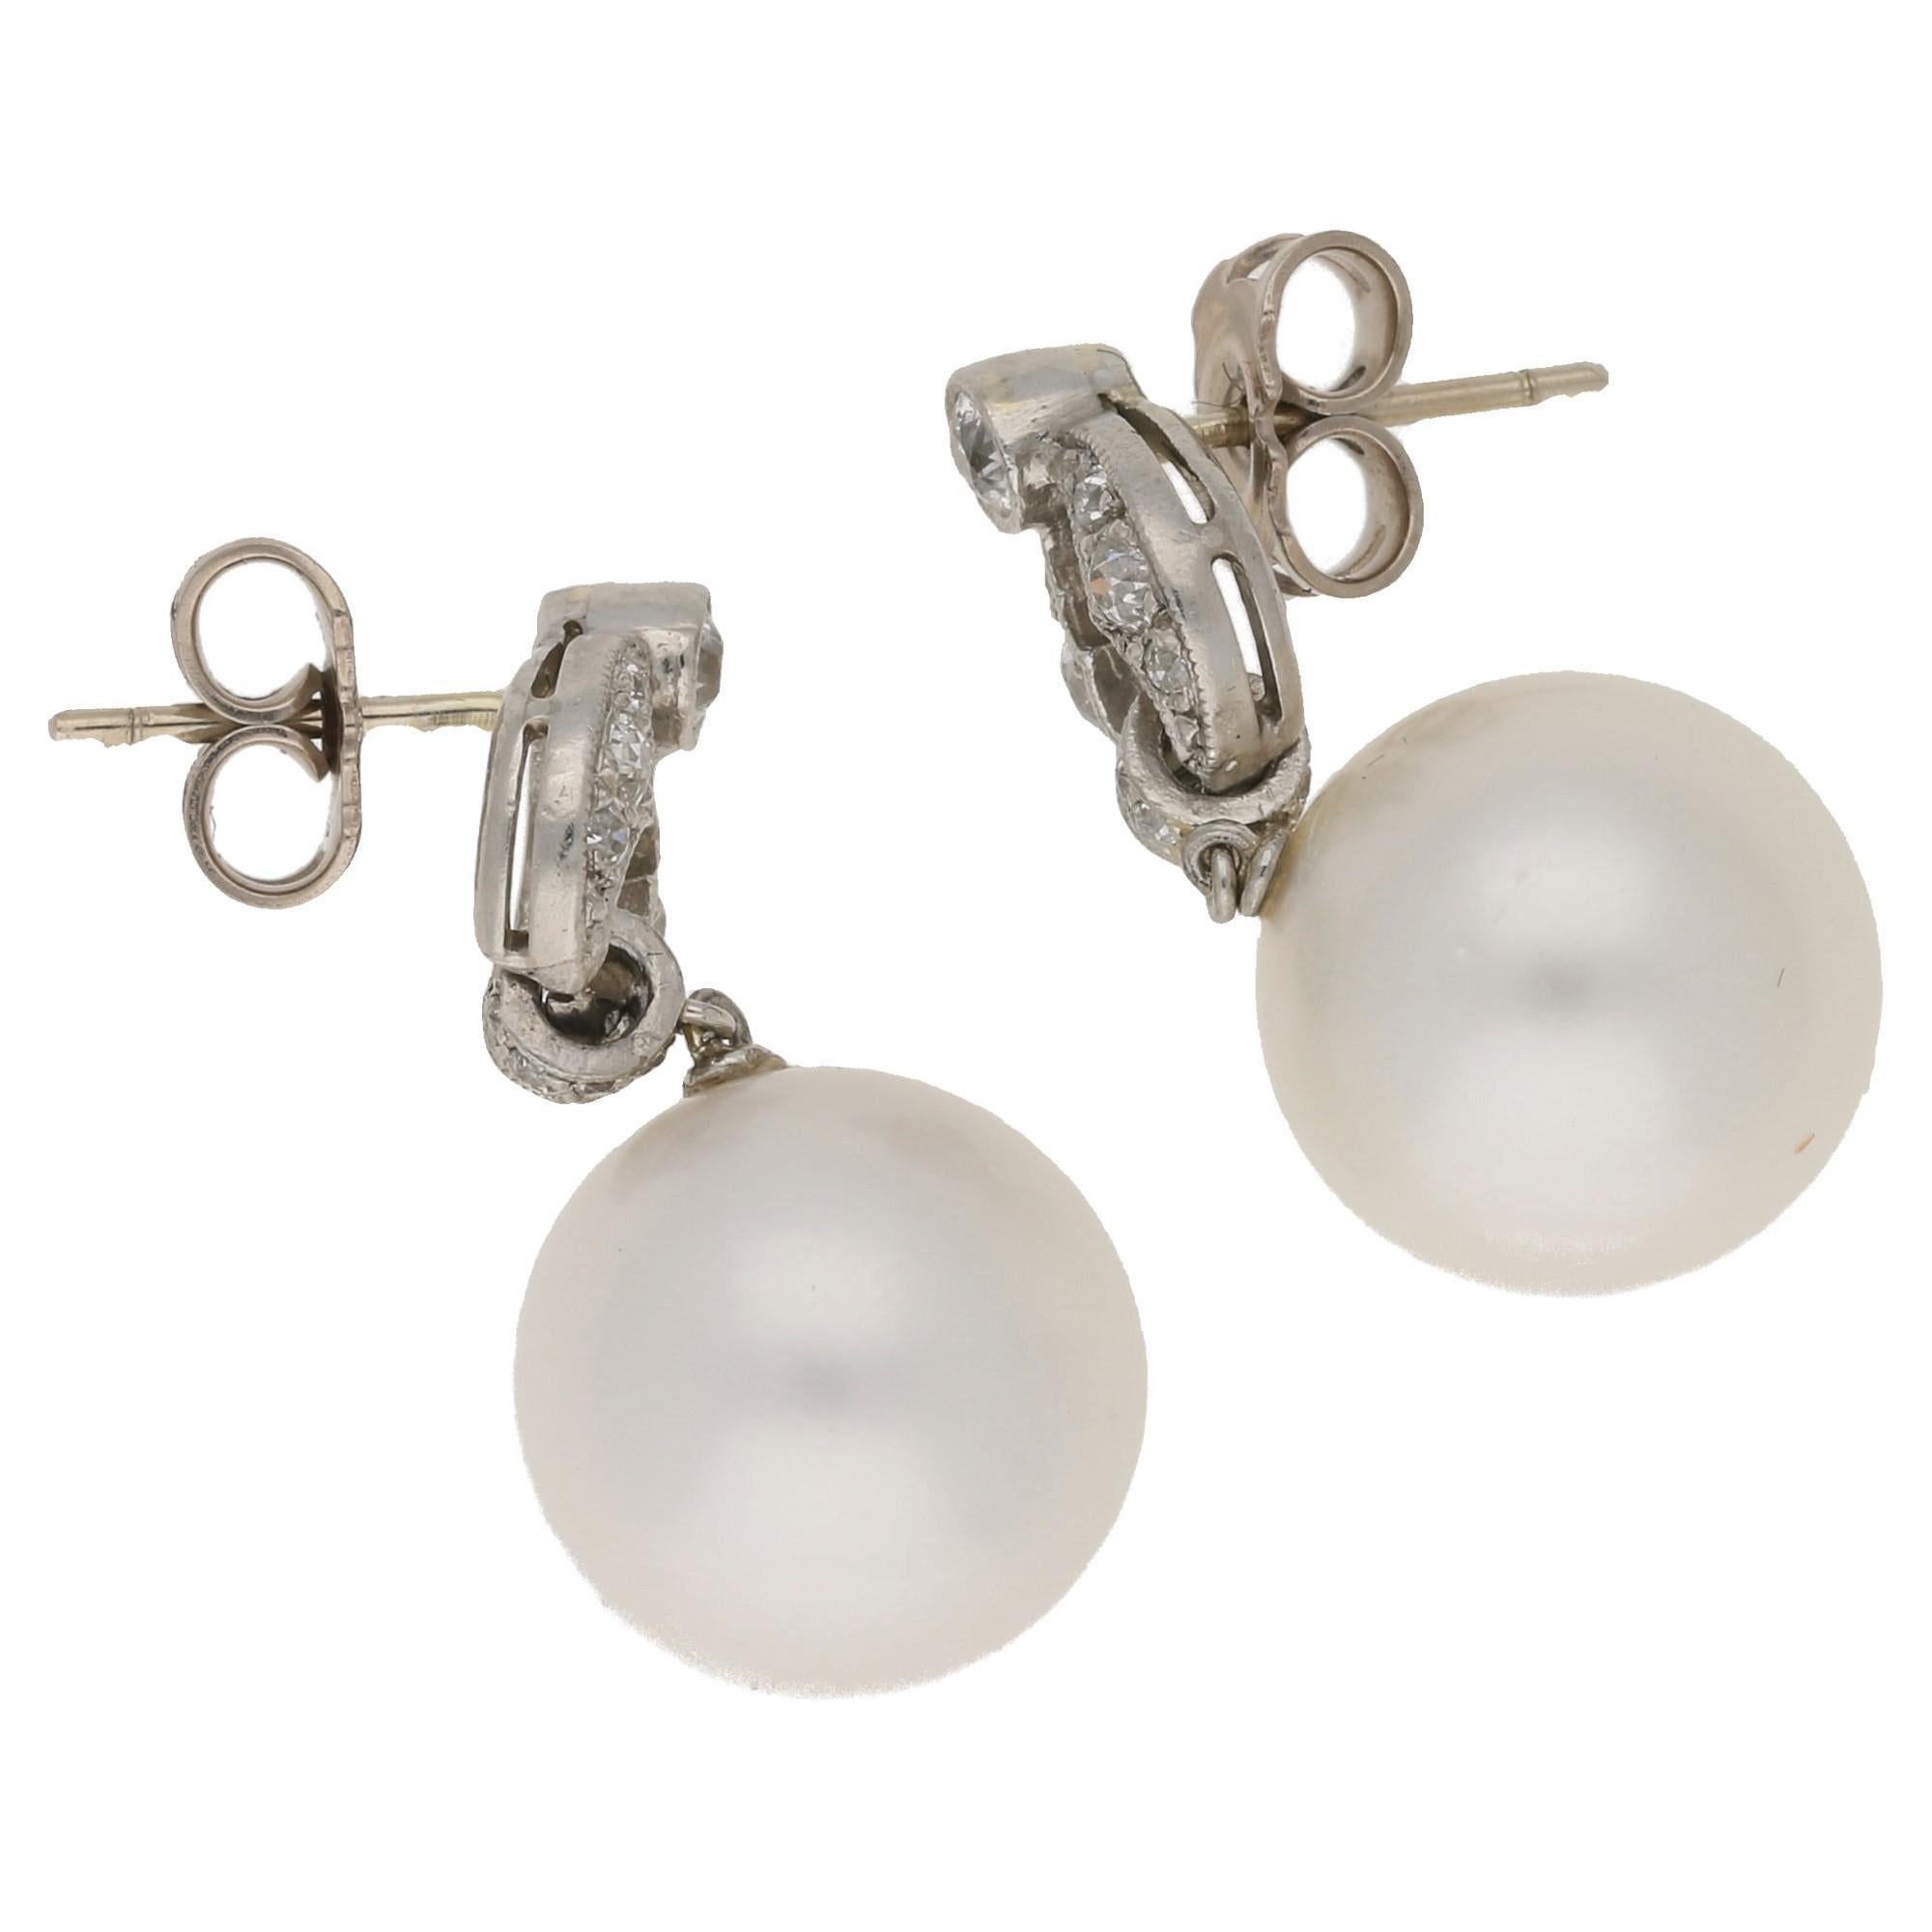 An elegant pair of 12mm South Sea Akoya pearl earrings. Topped with a full pave set articulated ring, connecting to a pierced openwork pannel of pave set Old European cut diamonds, topped with a collet set Old European cut diamond hiding the post